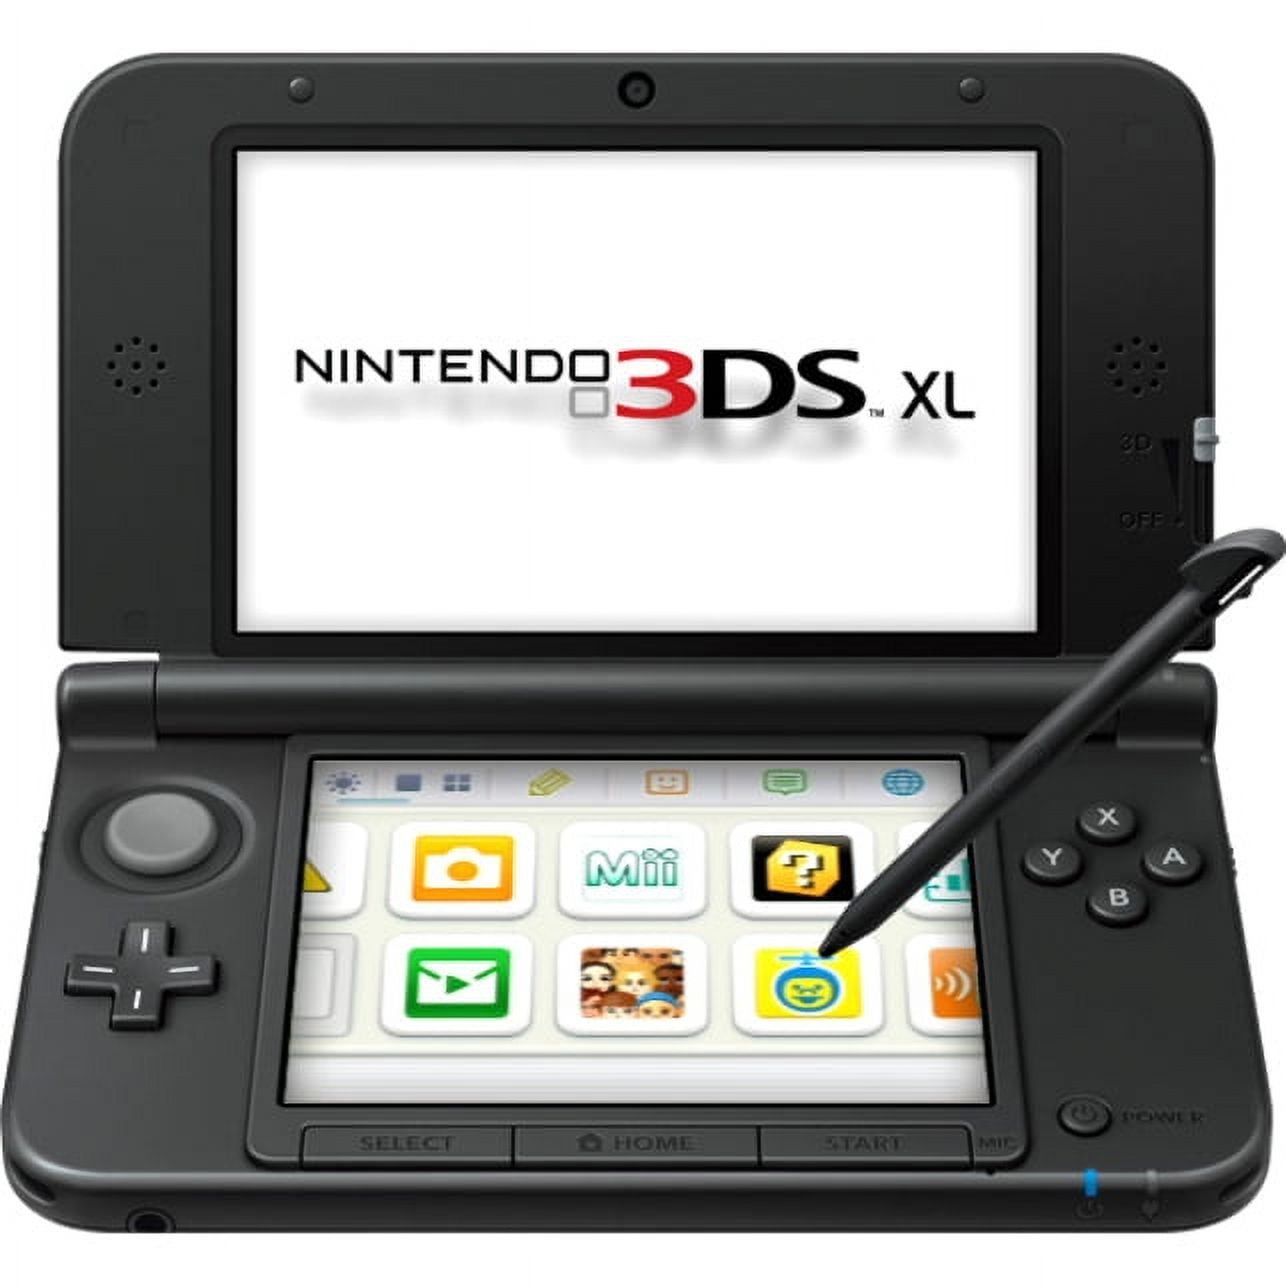 A model shows a Nintendo DSi, the revamped version of Nintendo's